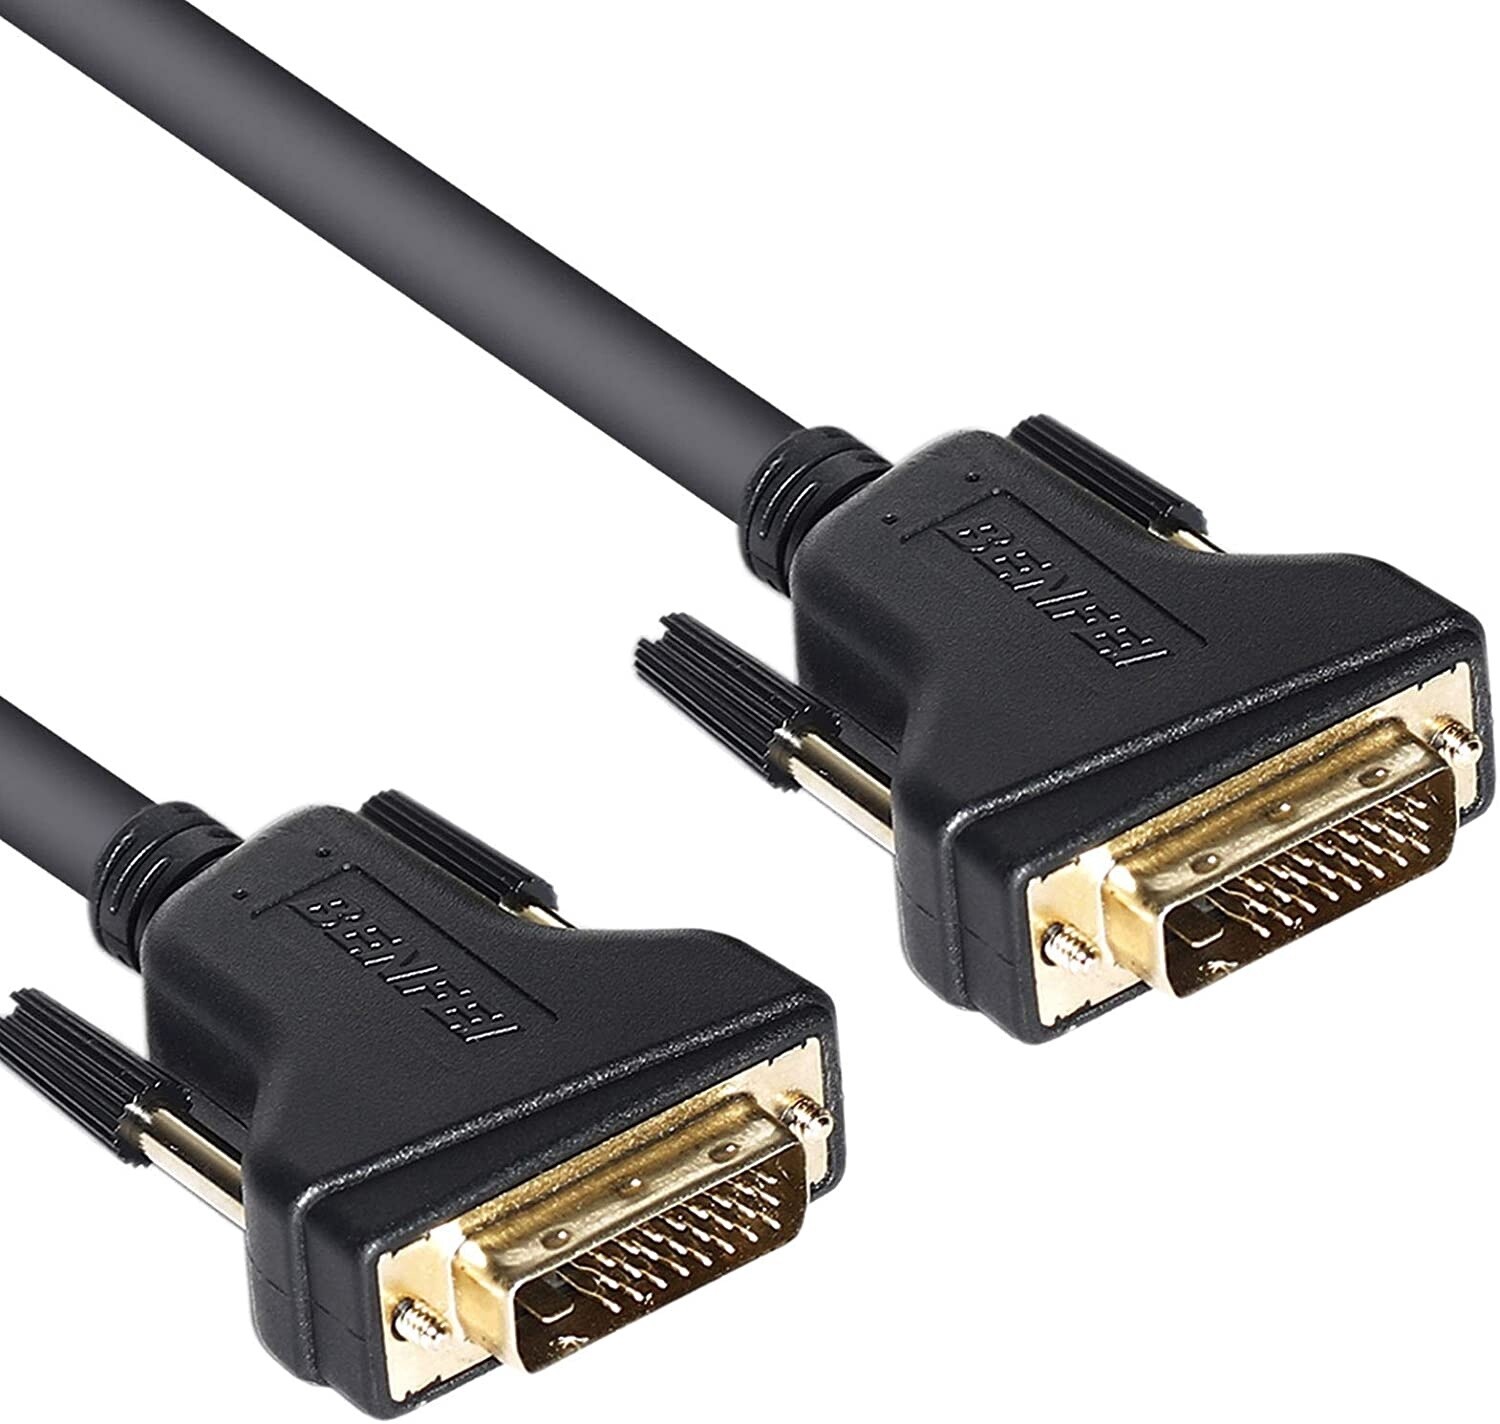 Cable - AVC-5000-02M DVI -D to DVI-D Male